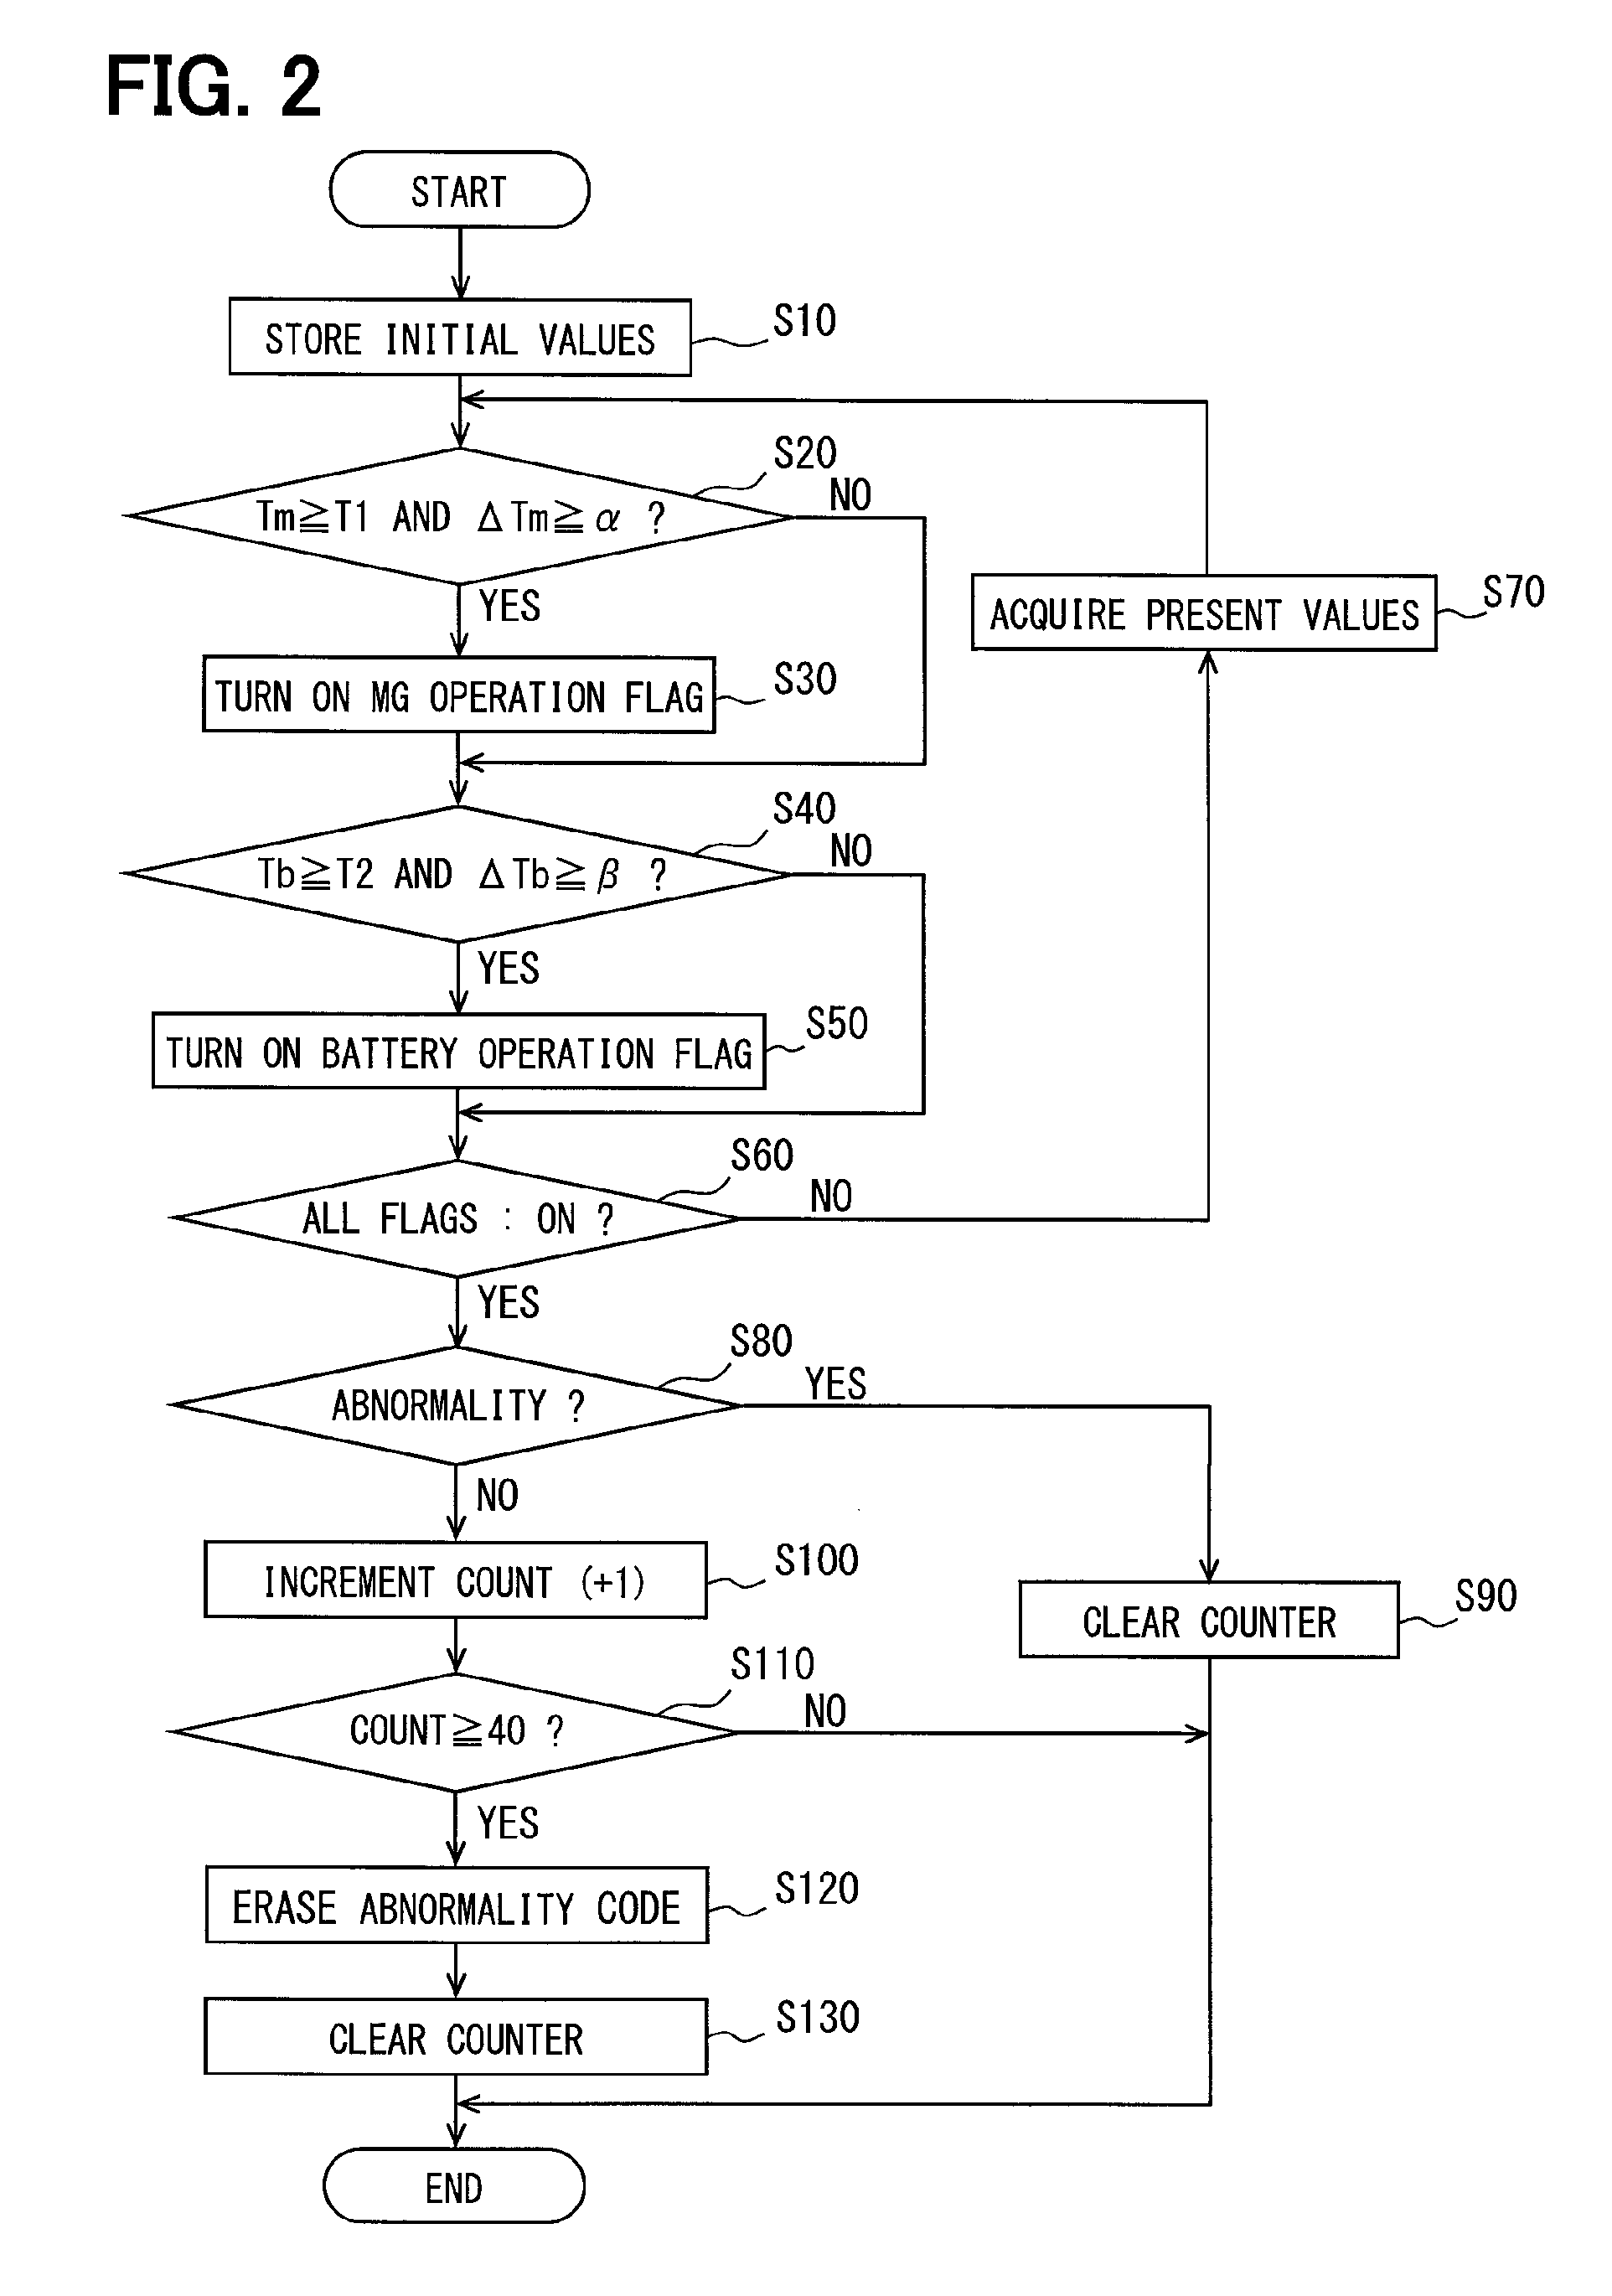 Electronic control apparatus for electrically-driven vehicle